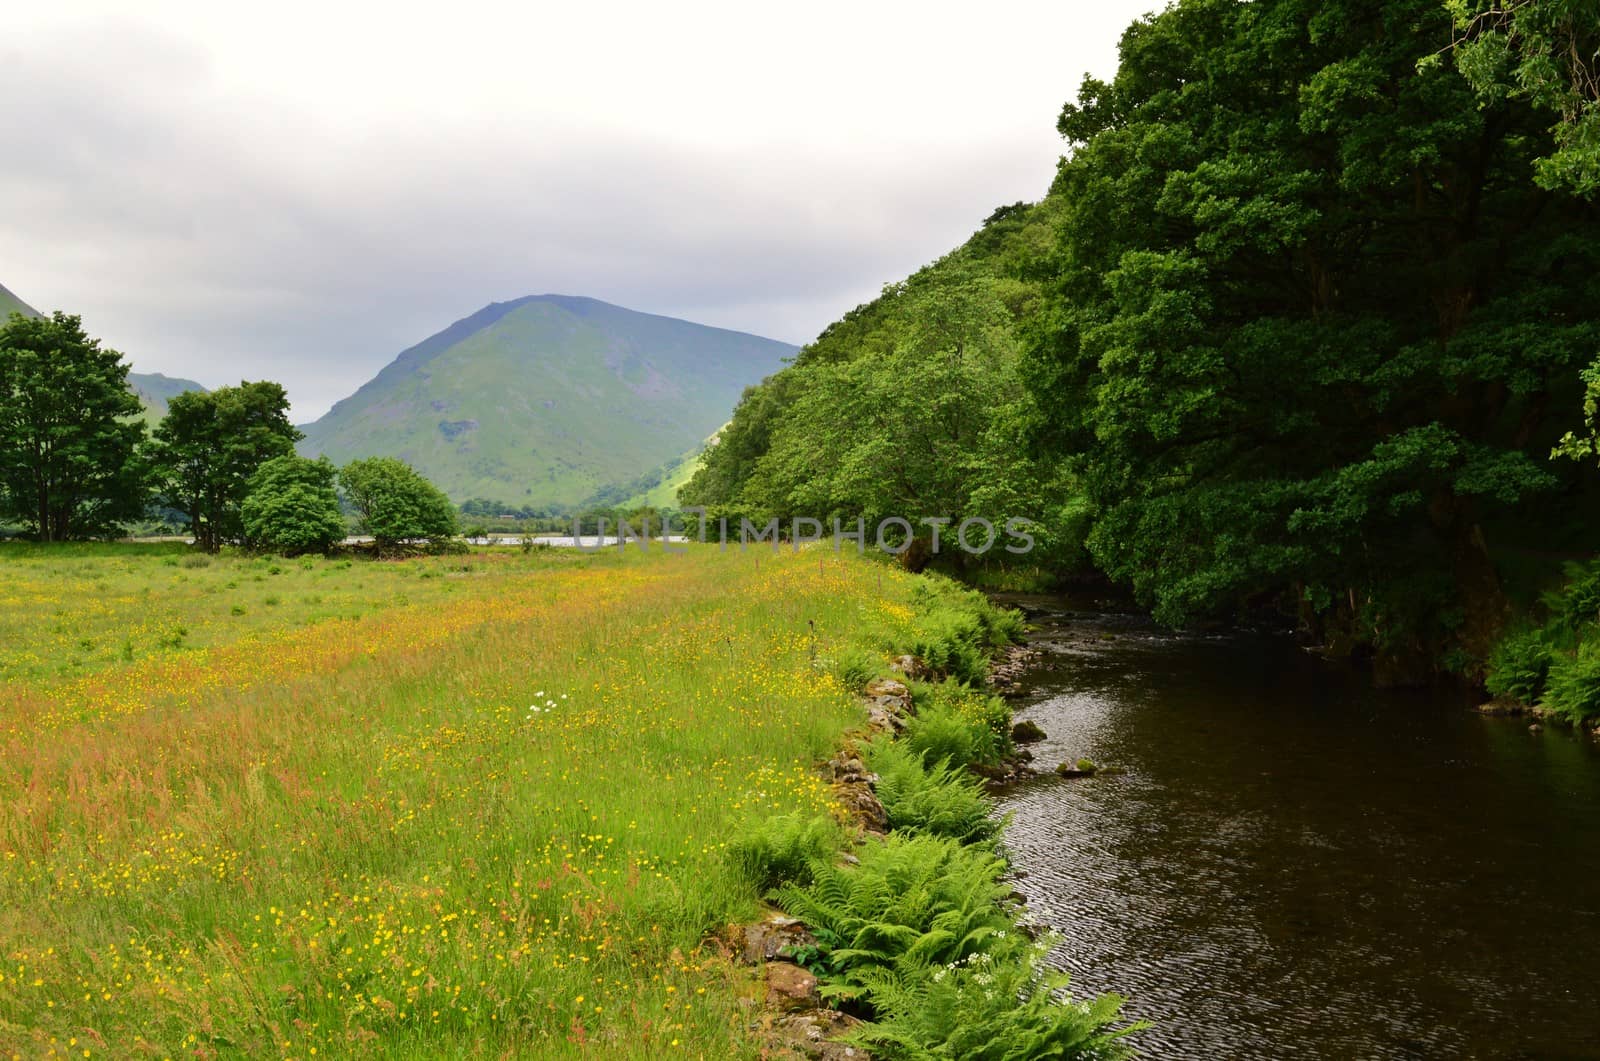 A Summer landscape photographed in the English Lake District.